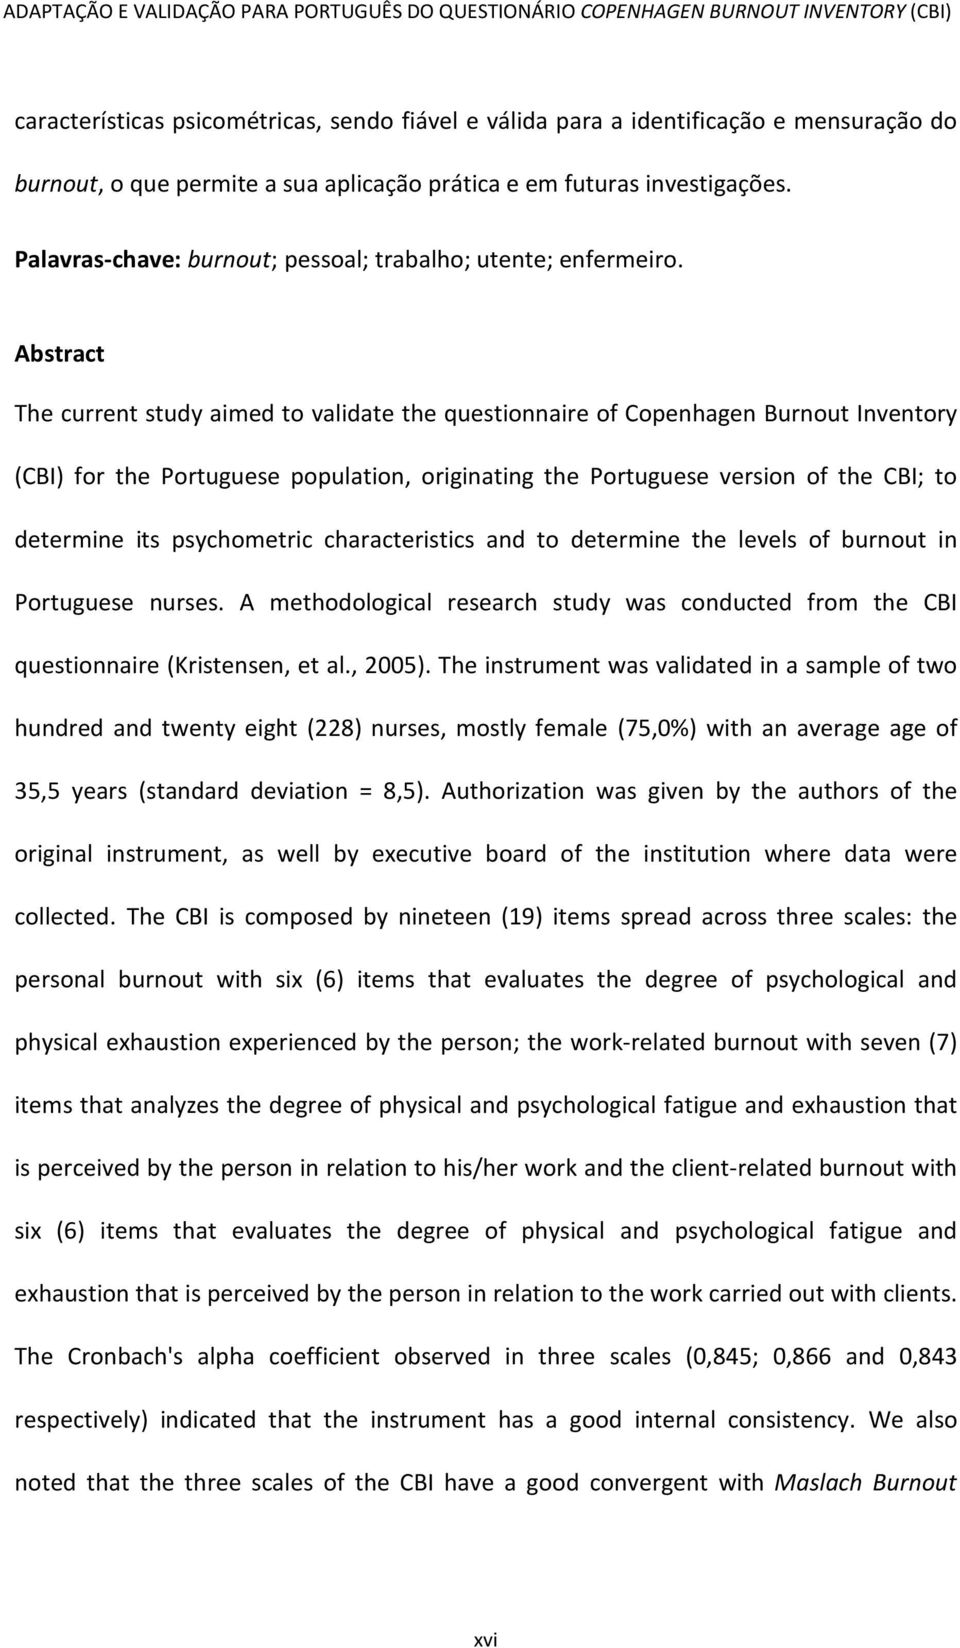 Abstract The current study aimed to validate the questionnaire of Copenhagen Burnout Inventory (CBI) for the Portuguese population, originating the Portuguese version of the CBI; to determine its